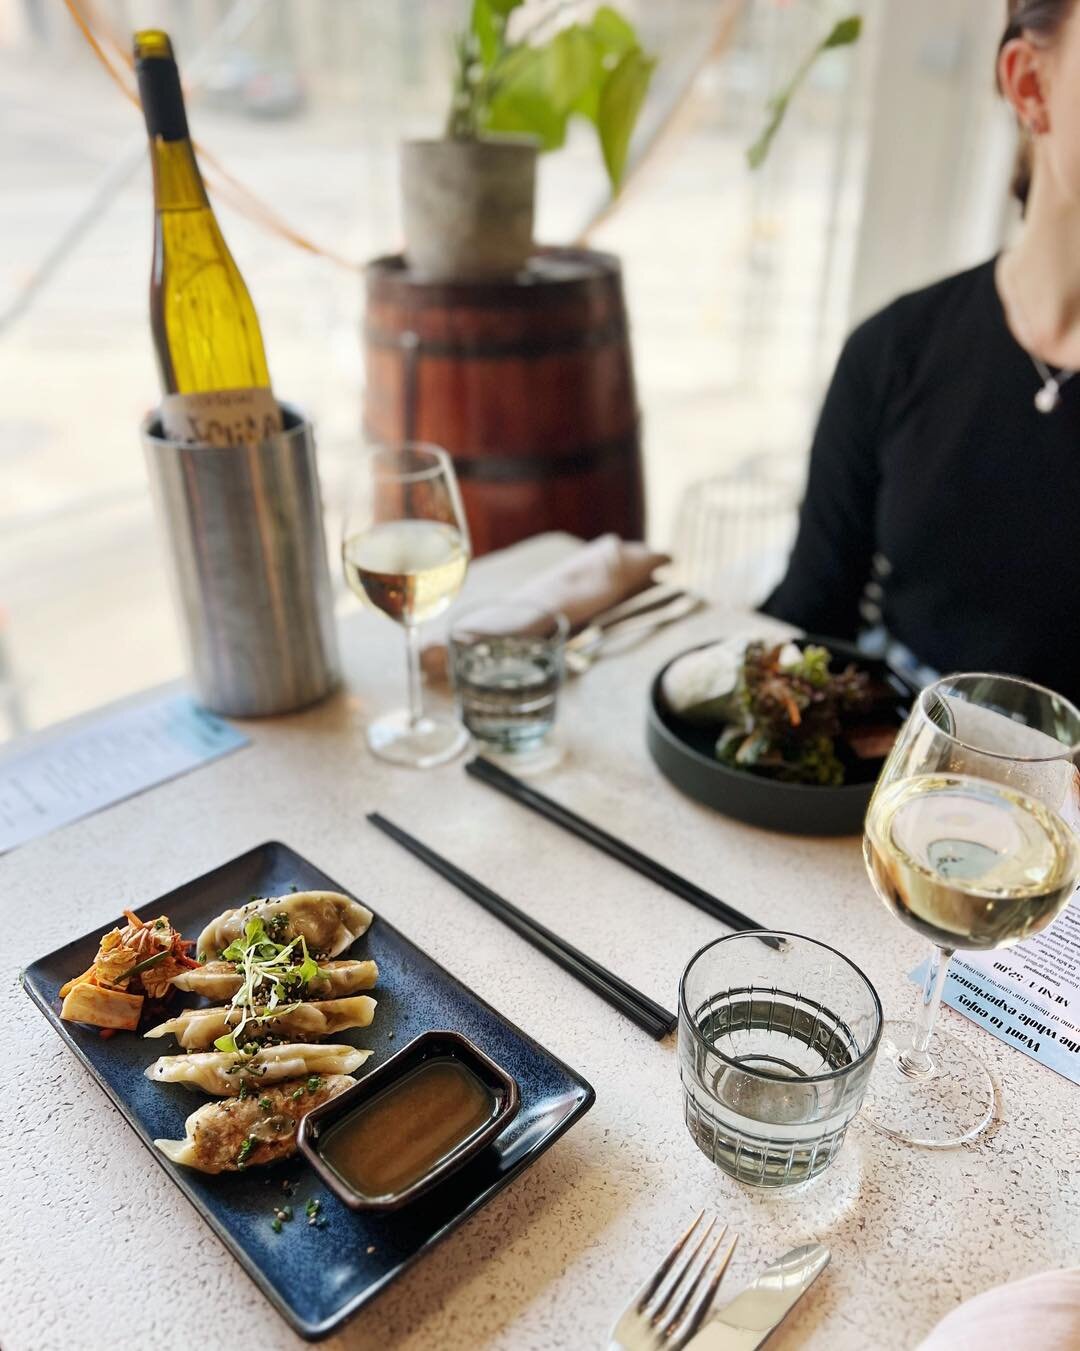 Which do you choose from our starter menu? Perhaps Sam's fried gyoza with duck or vegetable stuffing? 😍

Book your table now for the weekend either via our website or by calling 0406648868 💚

Welcome to